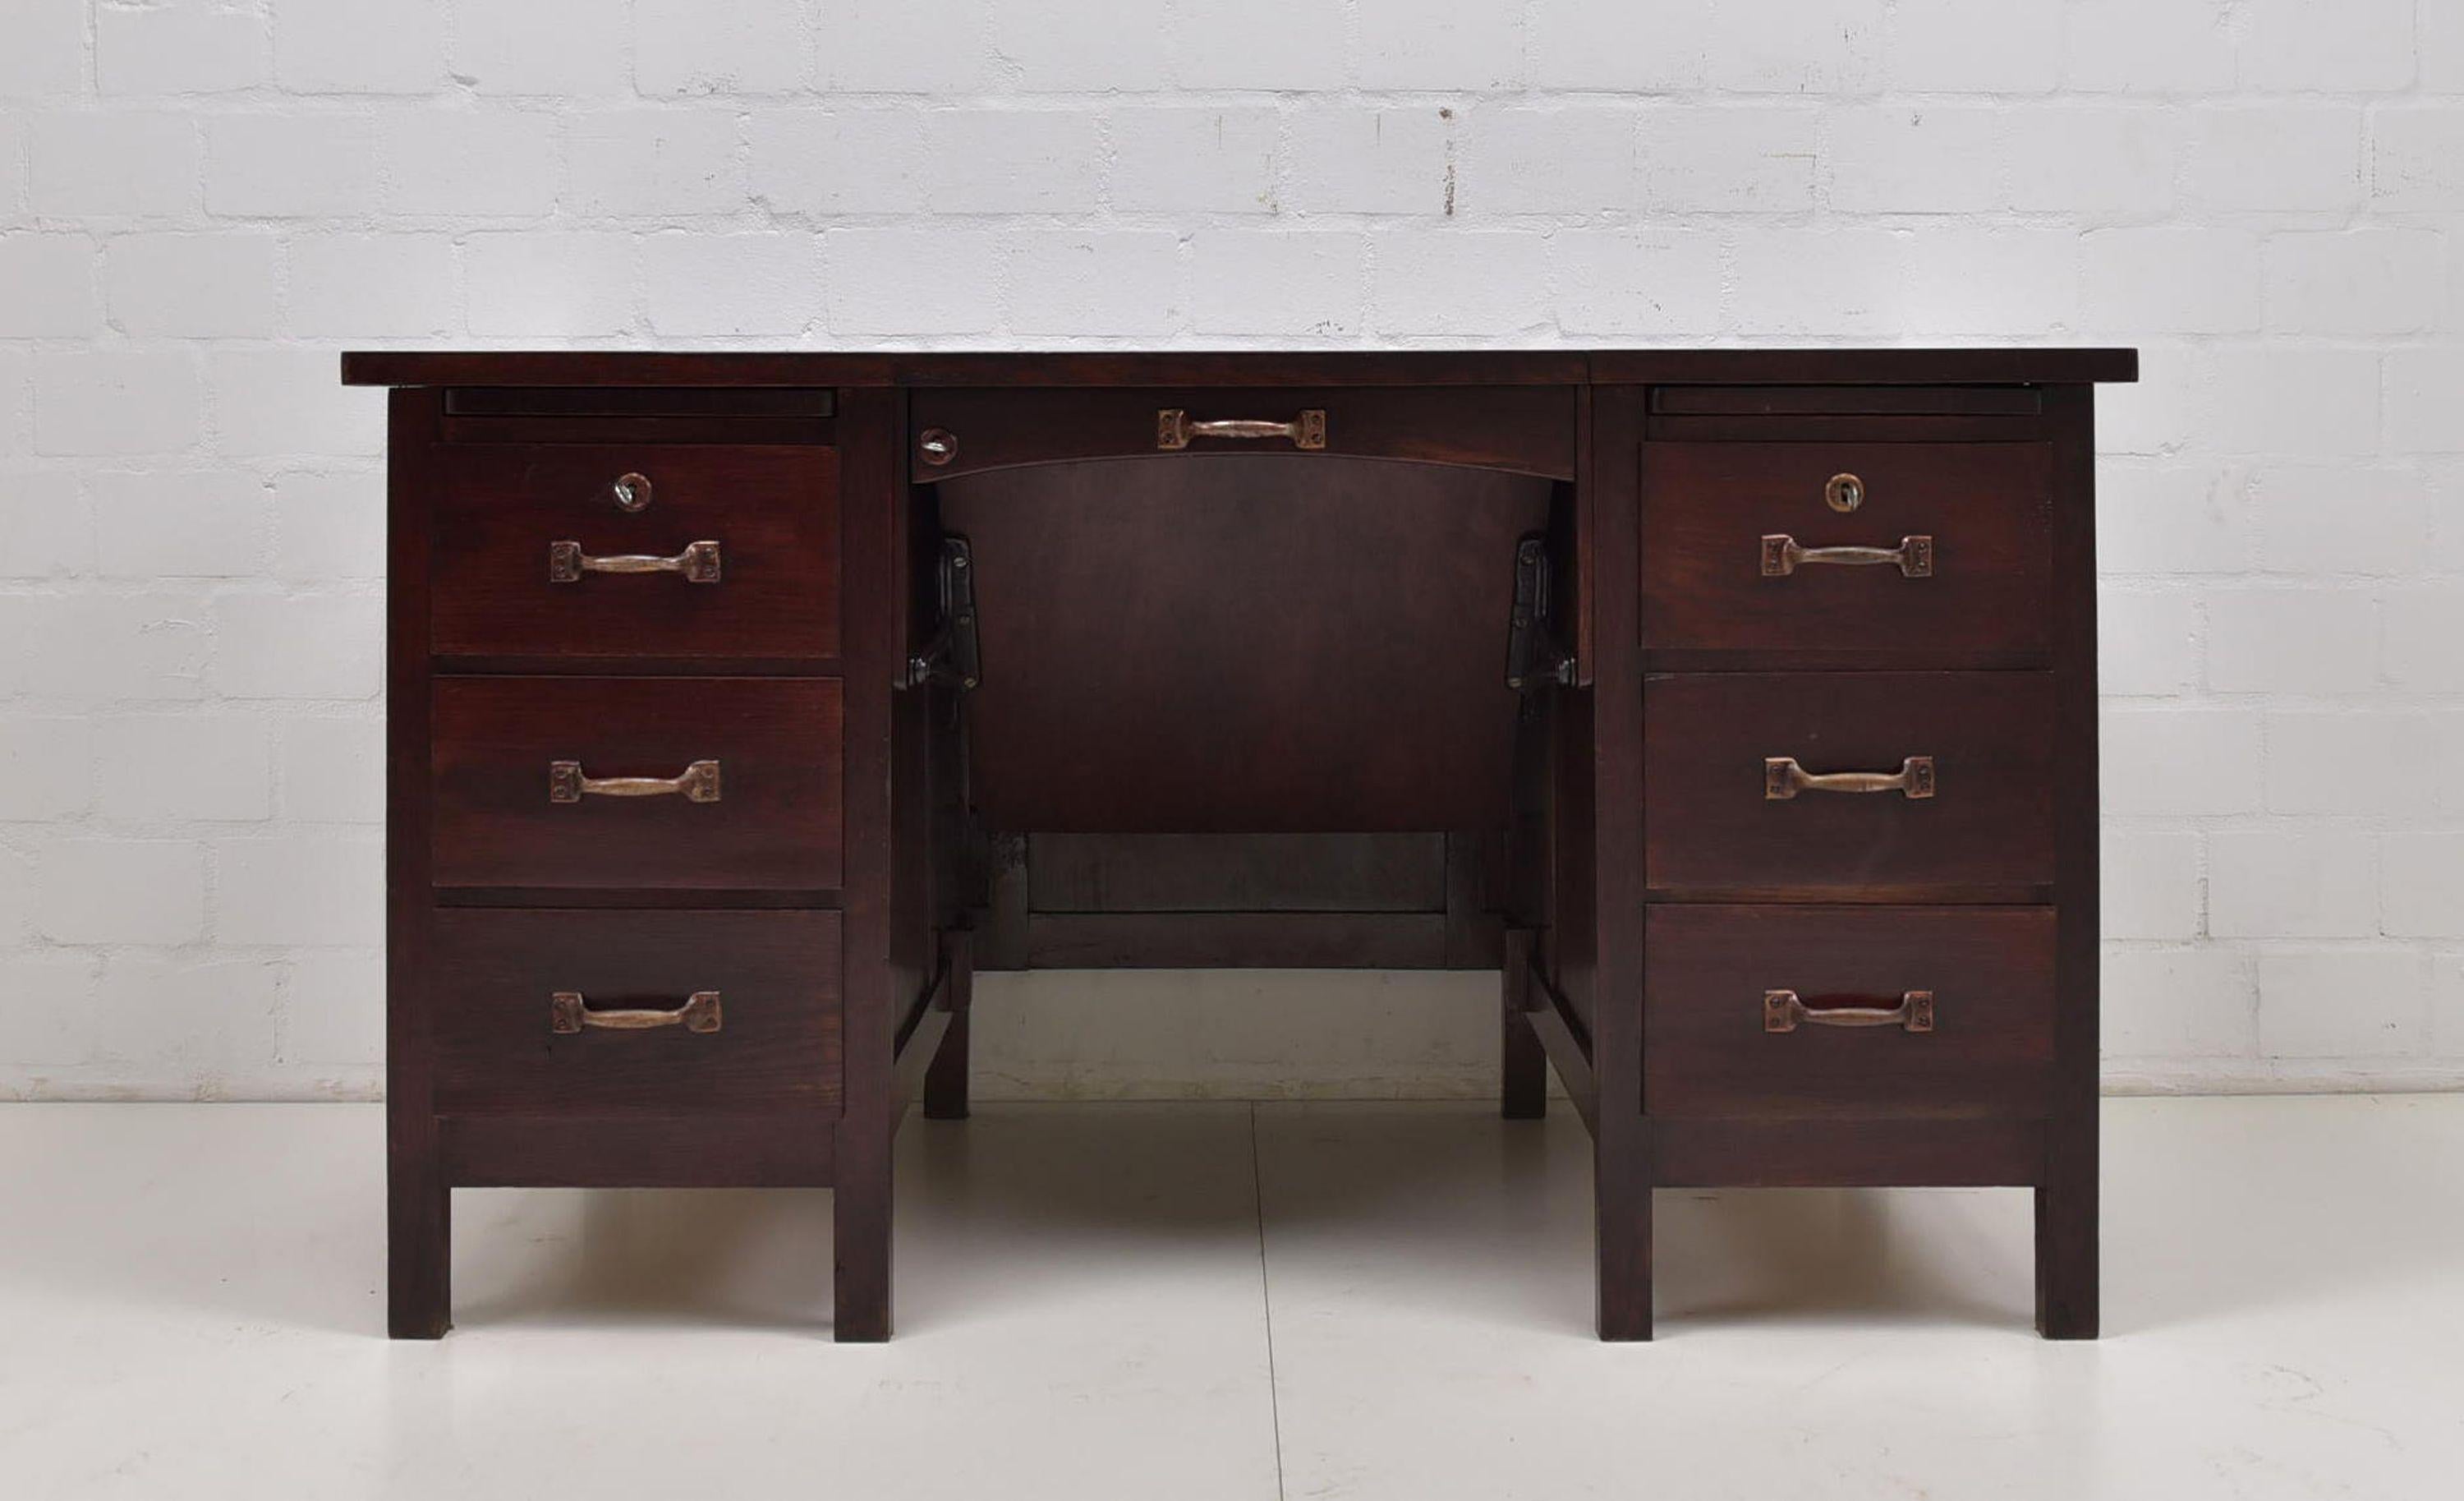 Typewriter table restored Bauhaus / Art Deco oak desk

Features:
With six drawers and two pull-out boards
Center foldable top with stowed typewriter surface
High quality
All drawers dovetailed
Original handles
The two upper drawers with